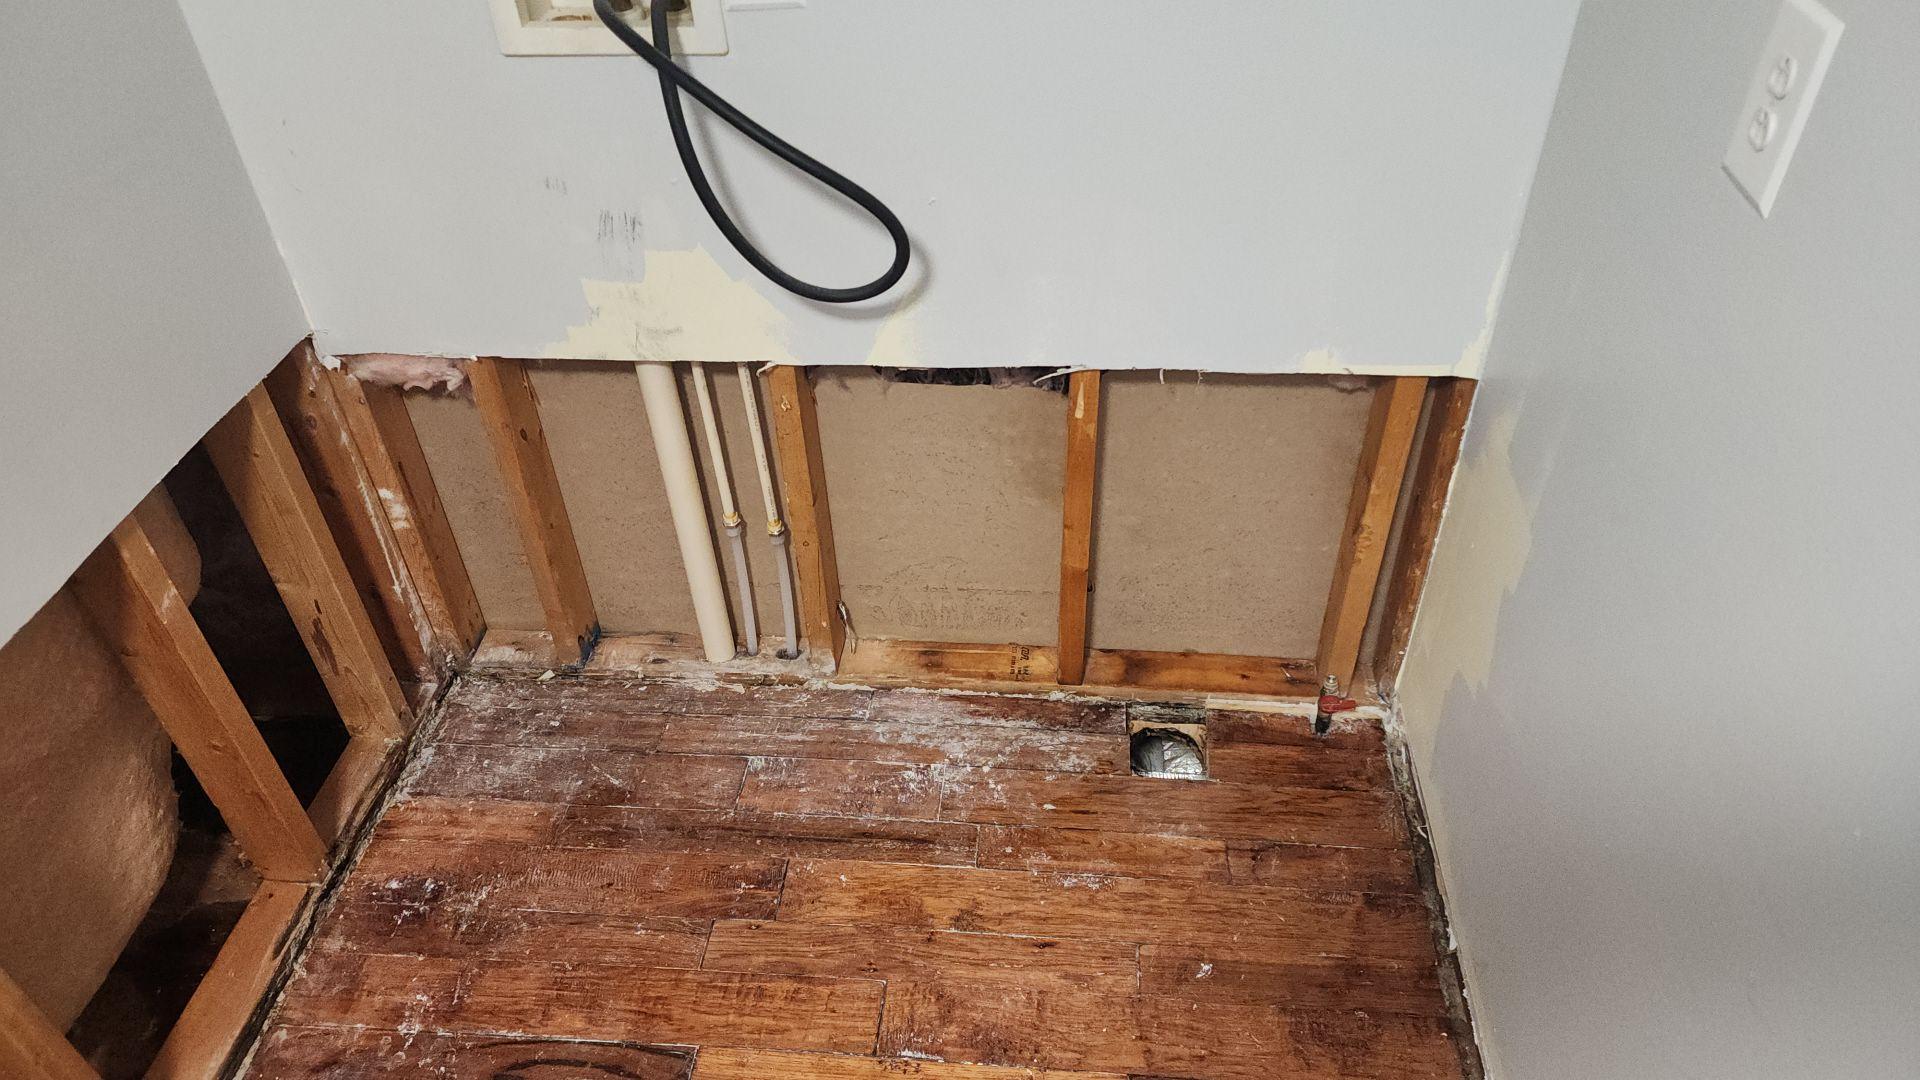 Removed damaged drywall behind washer and dryer